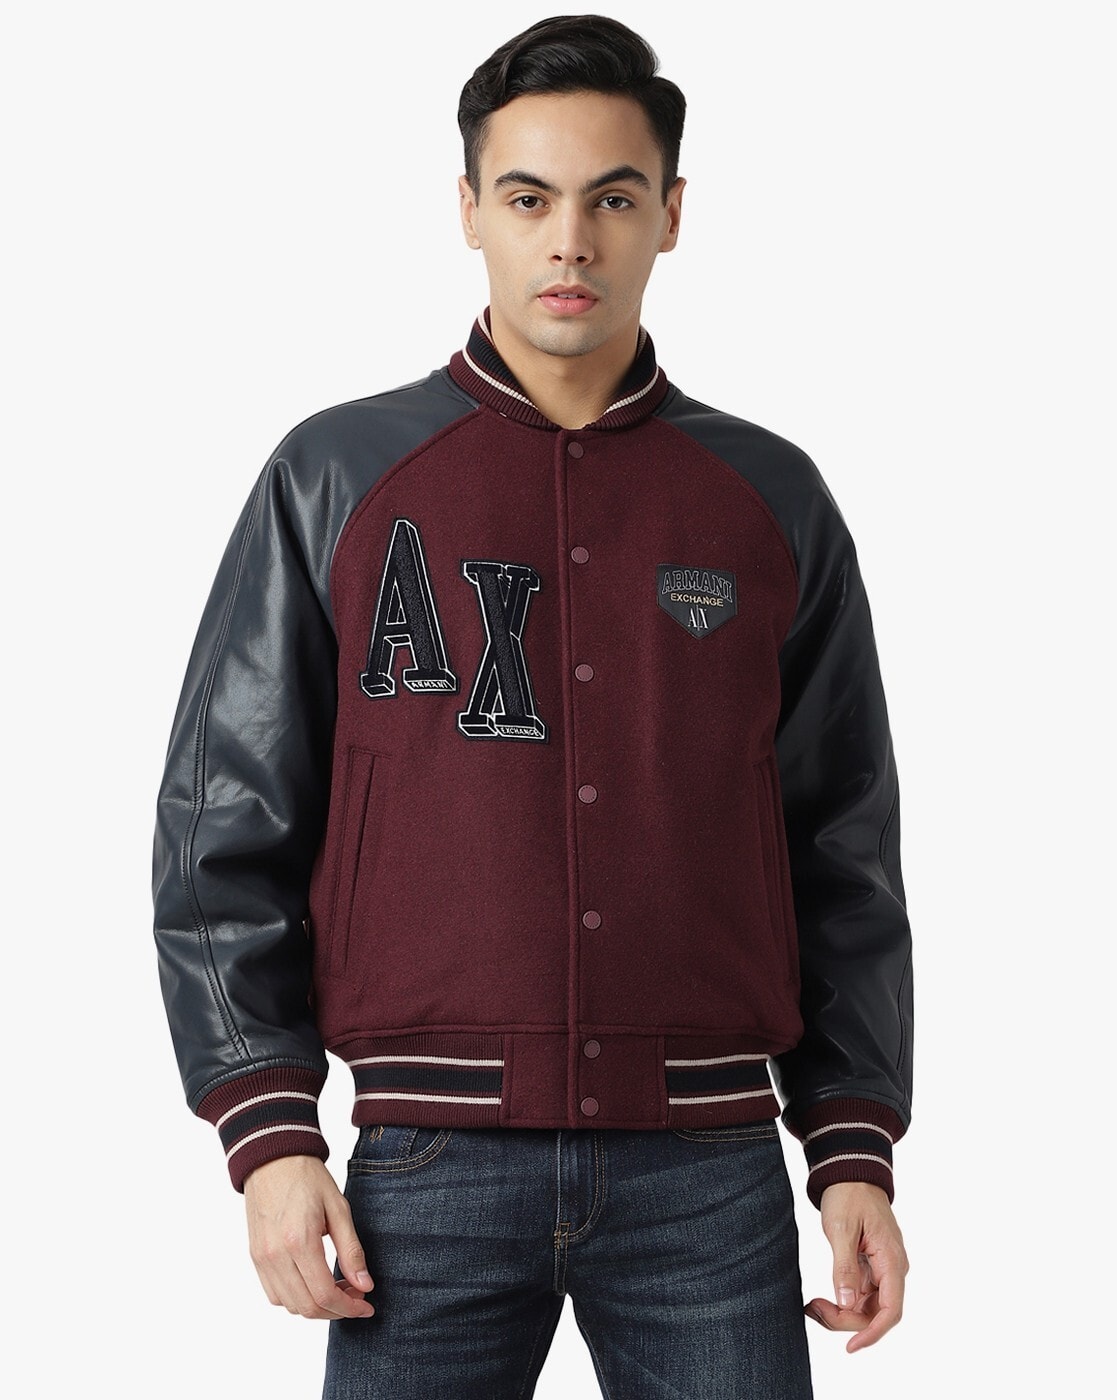 Which online stores sell affordable varsity jackets of good quality? In  some of the sites I've looked at, either the jackets are cheap but the  quality is poor, or the quality is